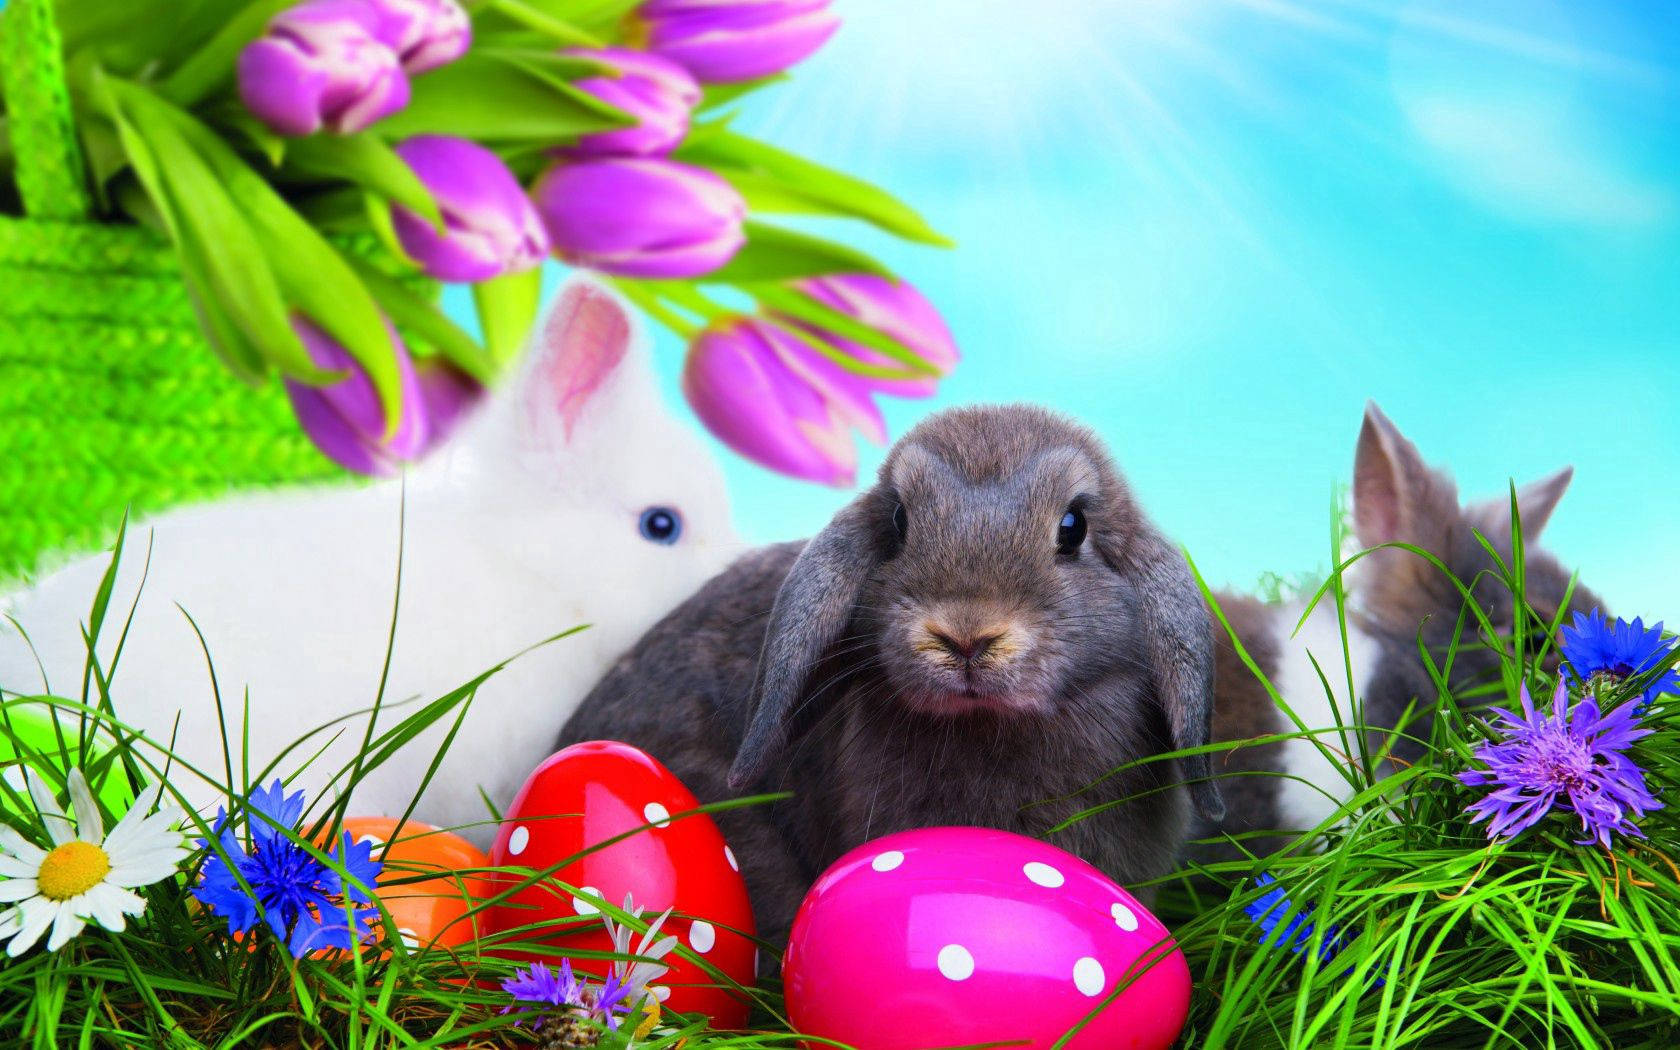 Celebrate Easter with Brightly Colored Eggs and Adorable Bunnies Wallpaper